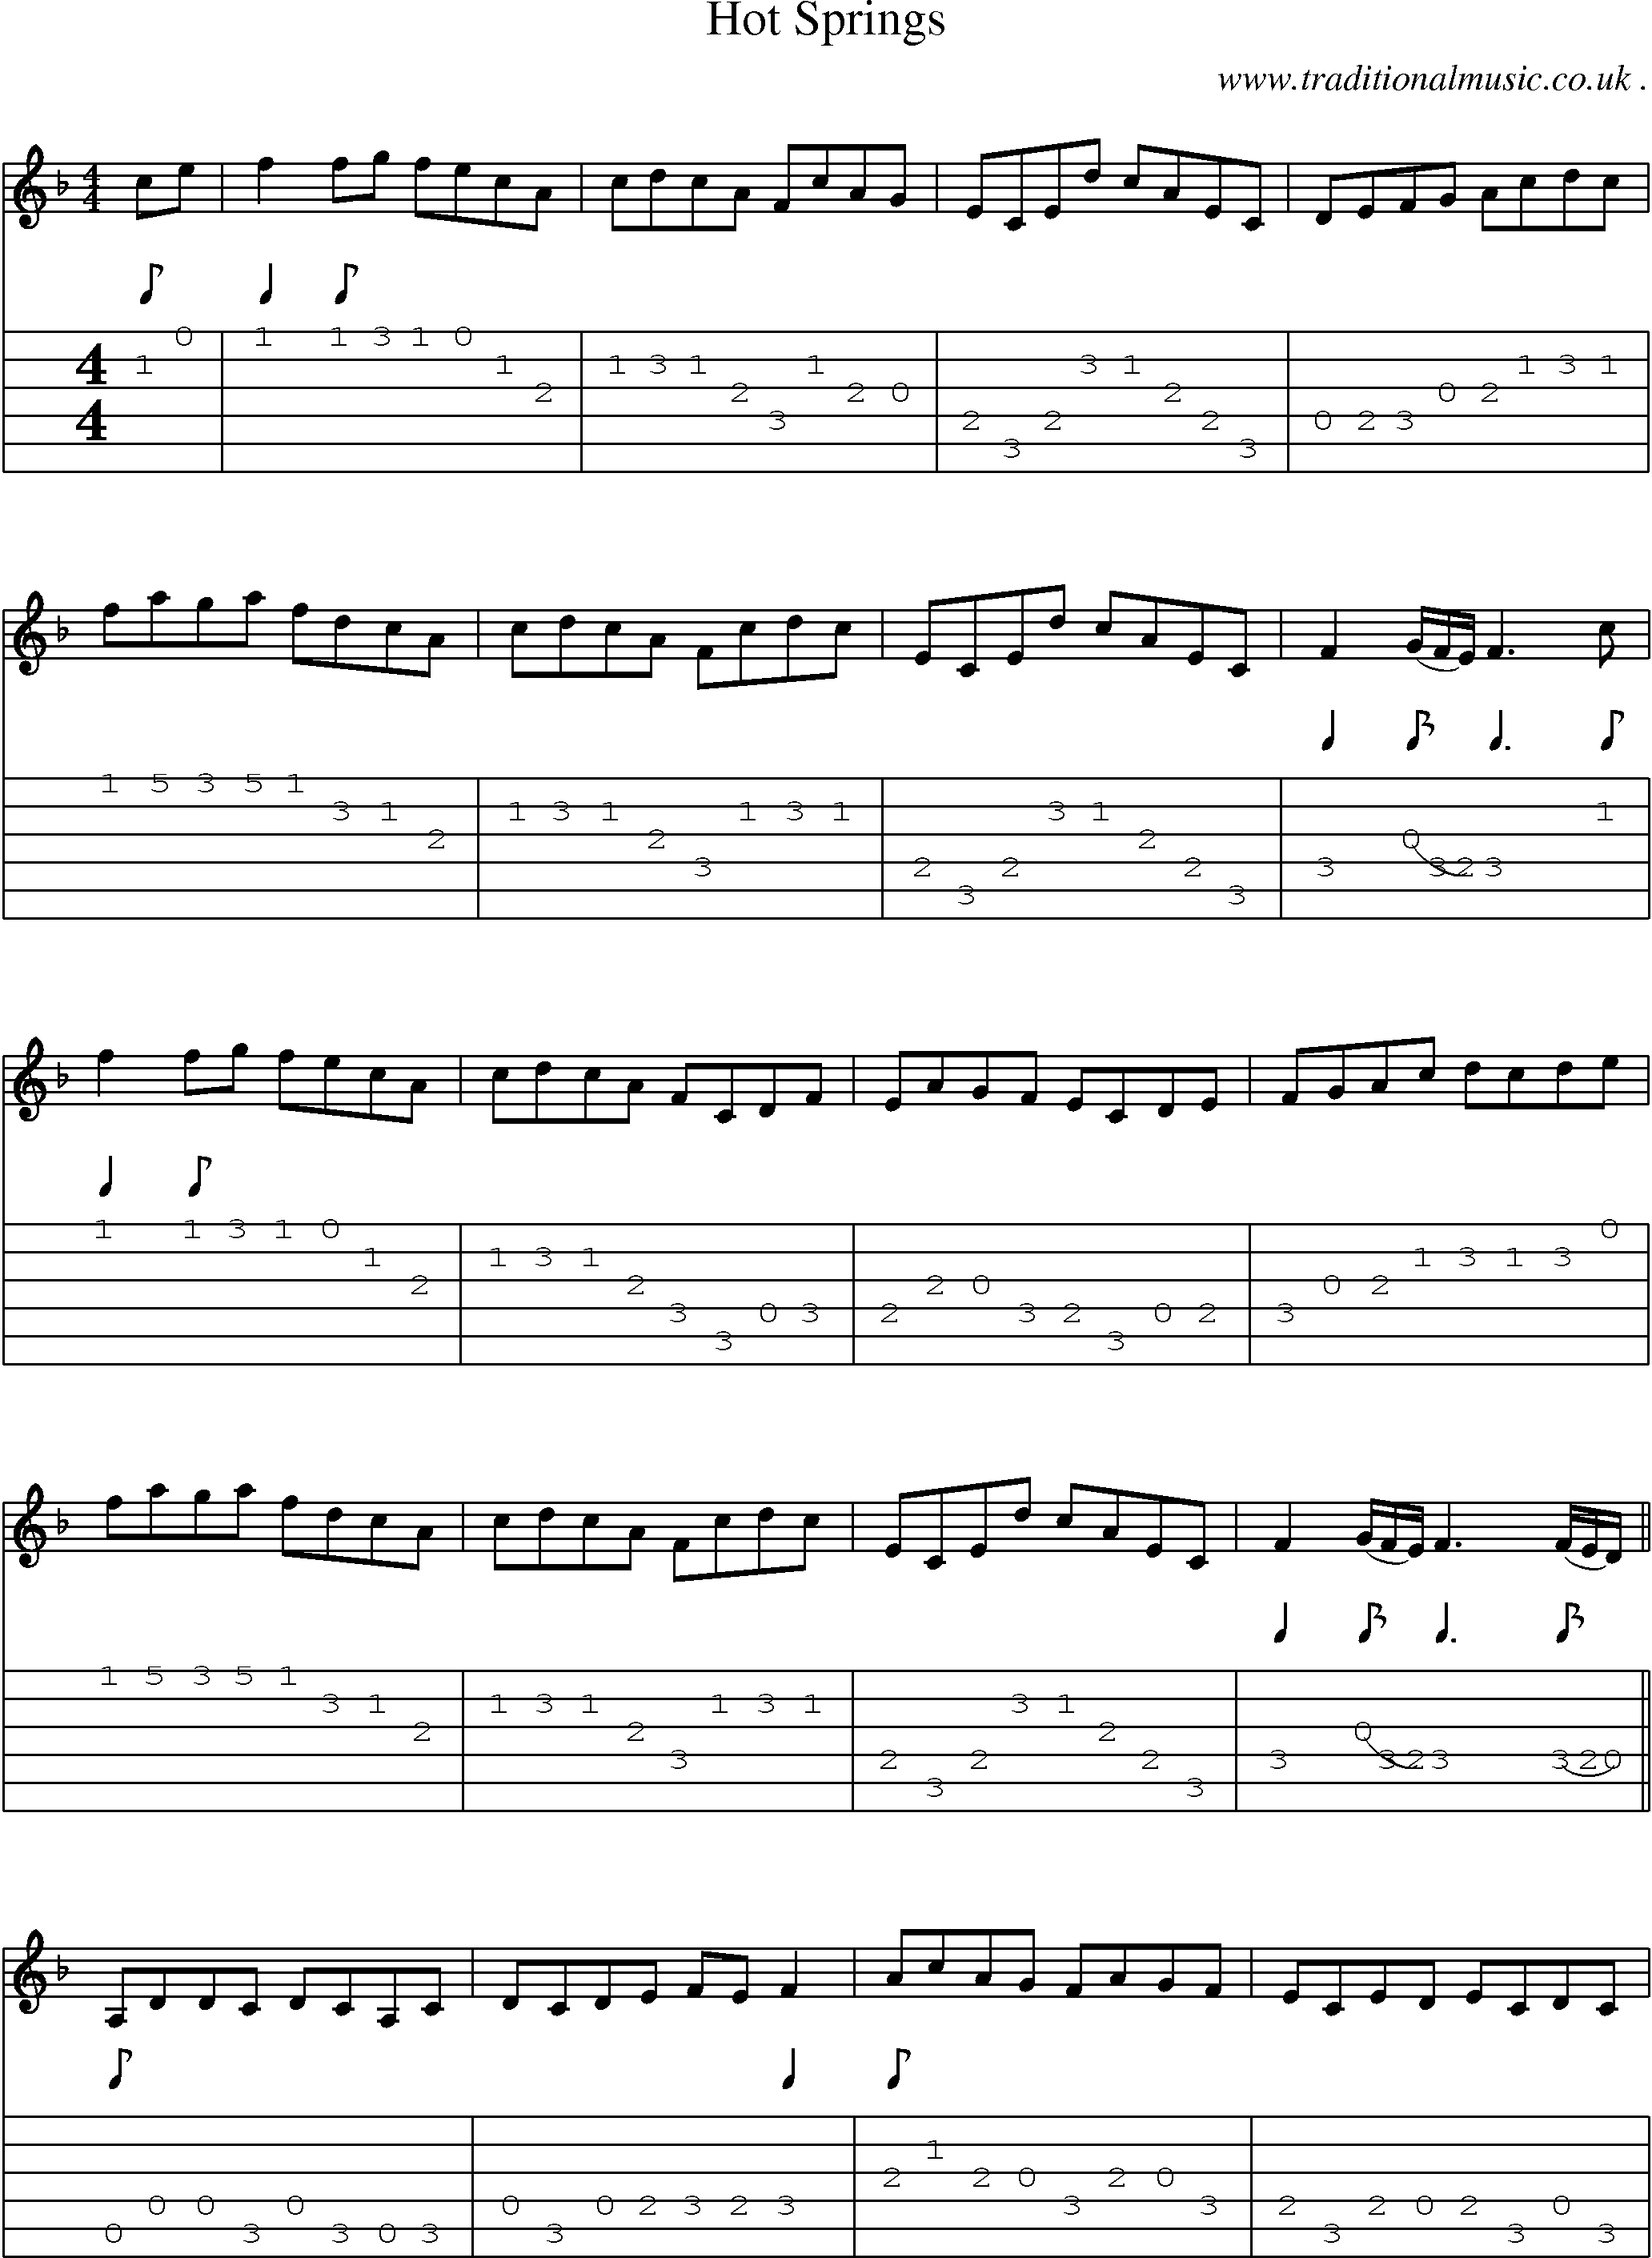 Music Score and Guitar Tabs for Hot Springs